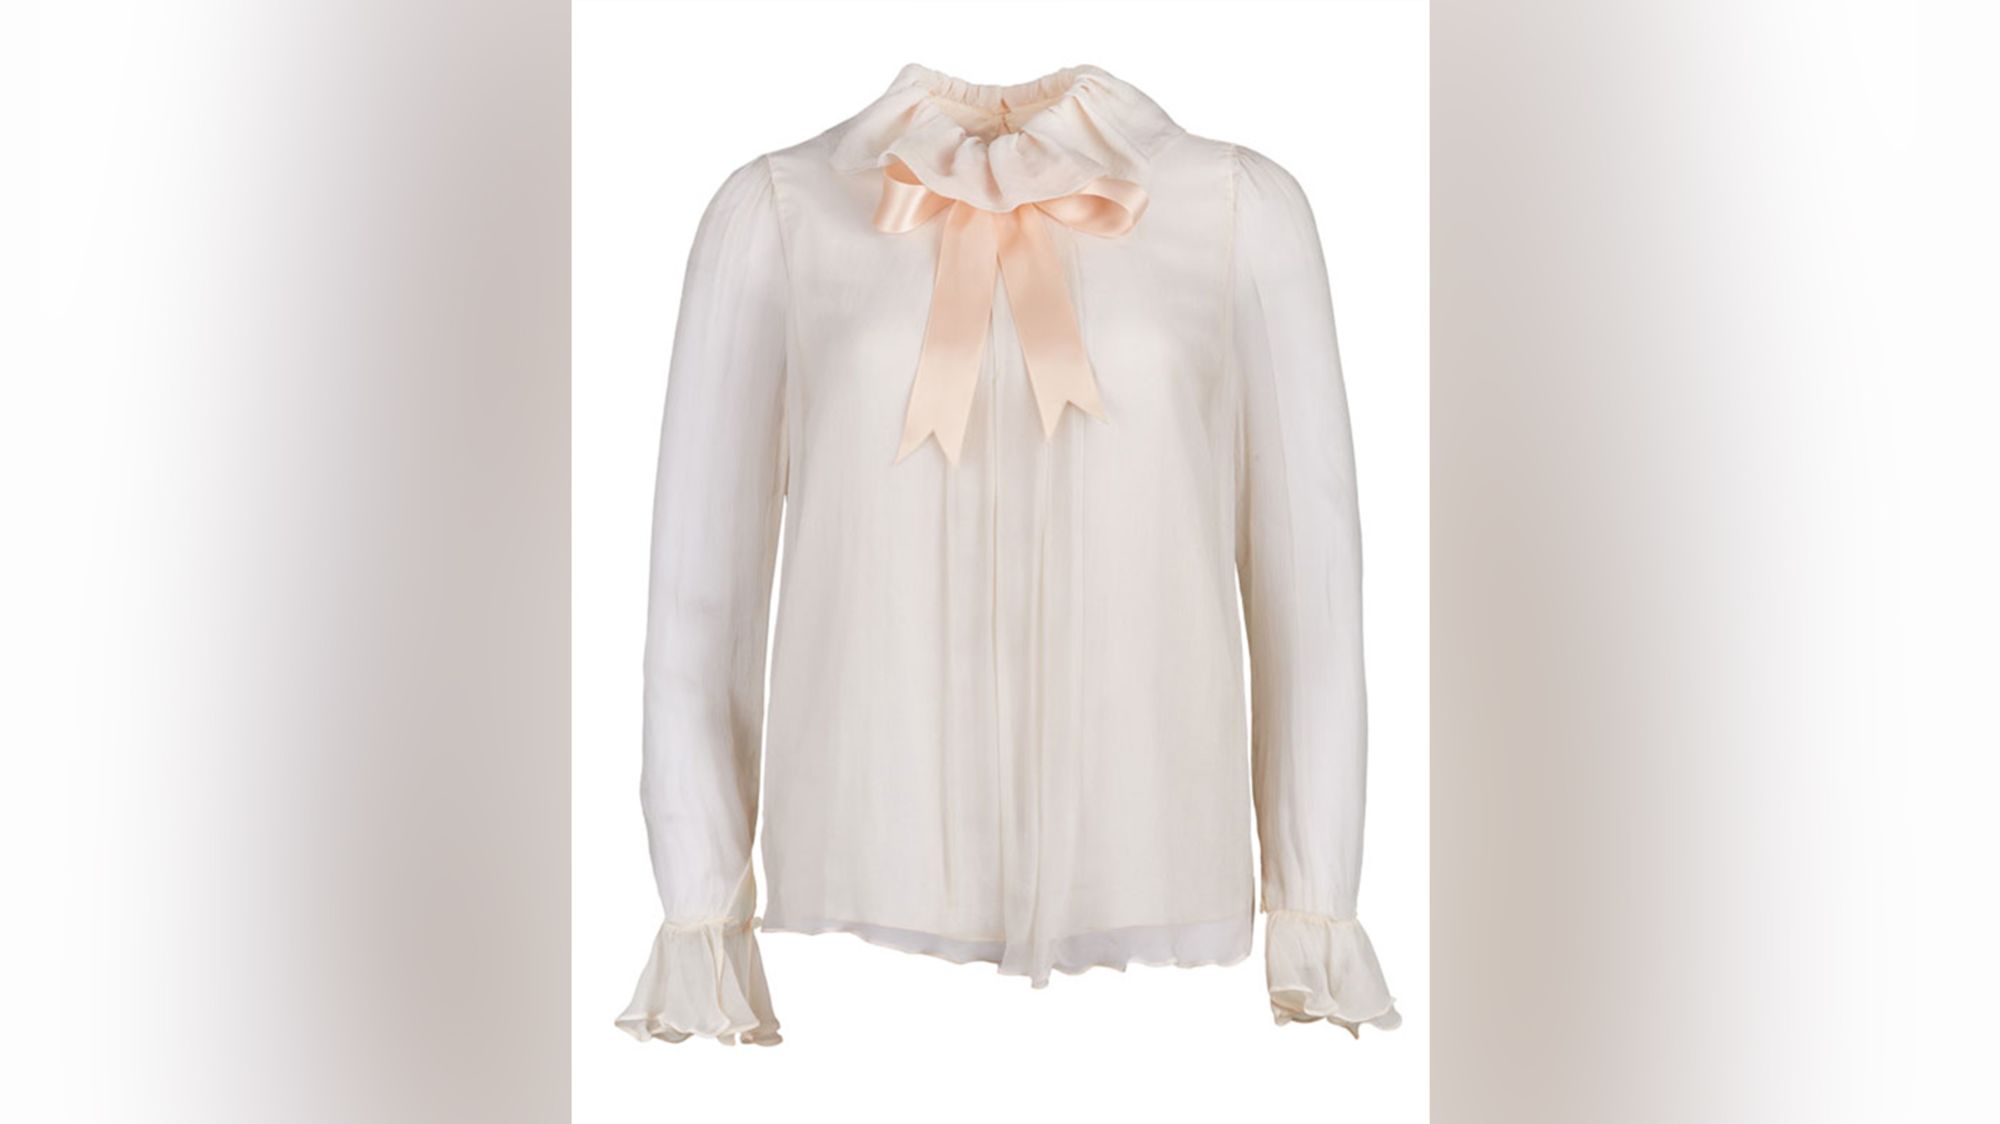 From Julien's Auction House: Making a stunning appearance on the auction block this December will be a piece from one of the most iconic images ever taken of Princess Diana: her blush pink chiffon Emanuels blouse worn in her famous 1981 engagement portrait photographed by Lord Snowdon.